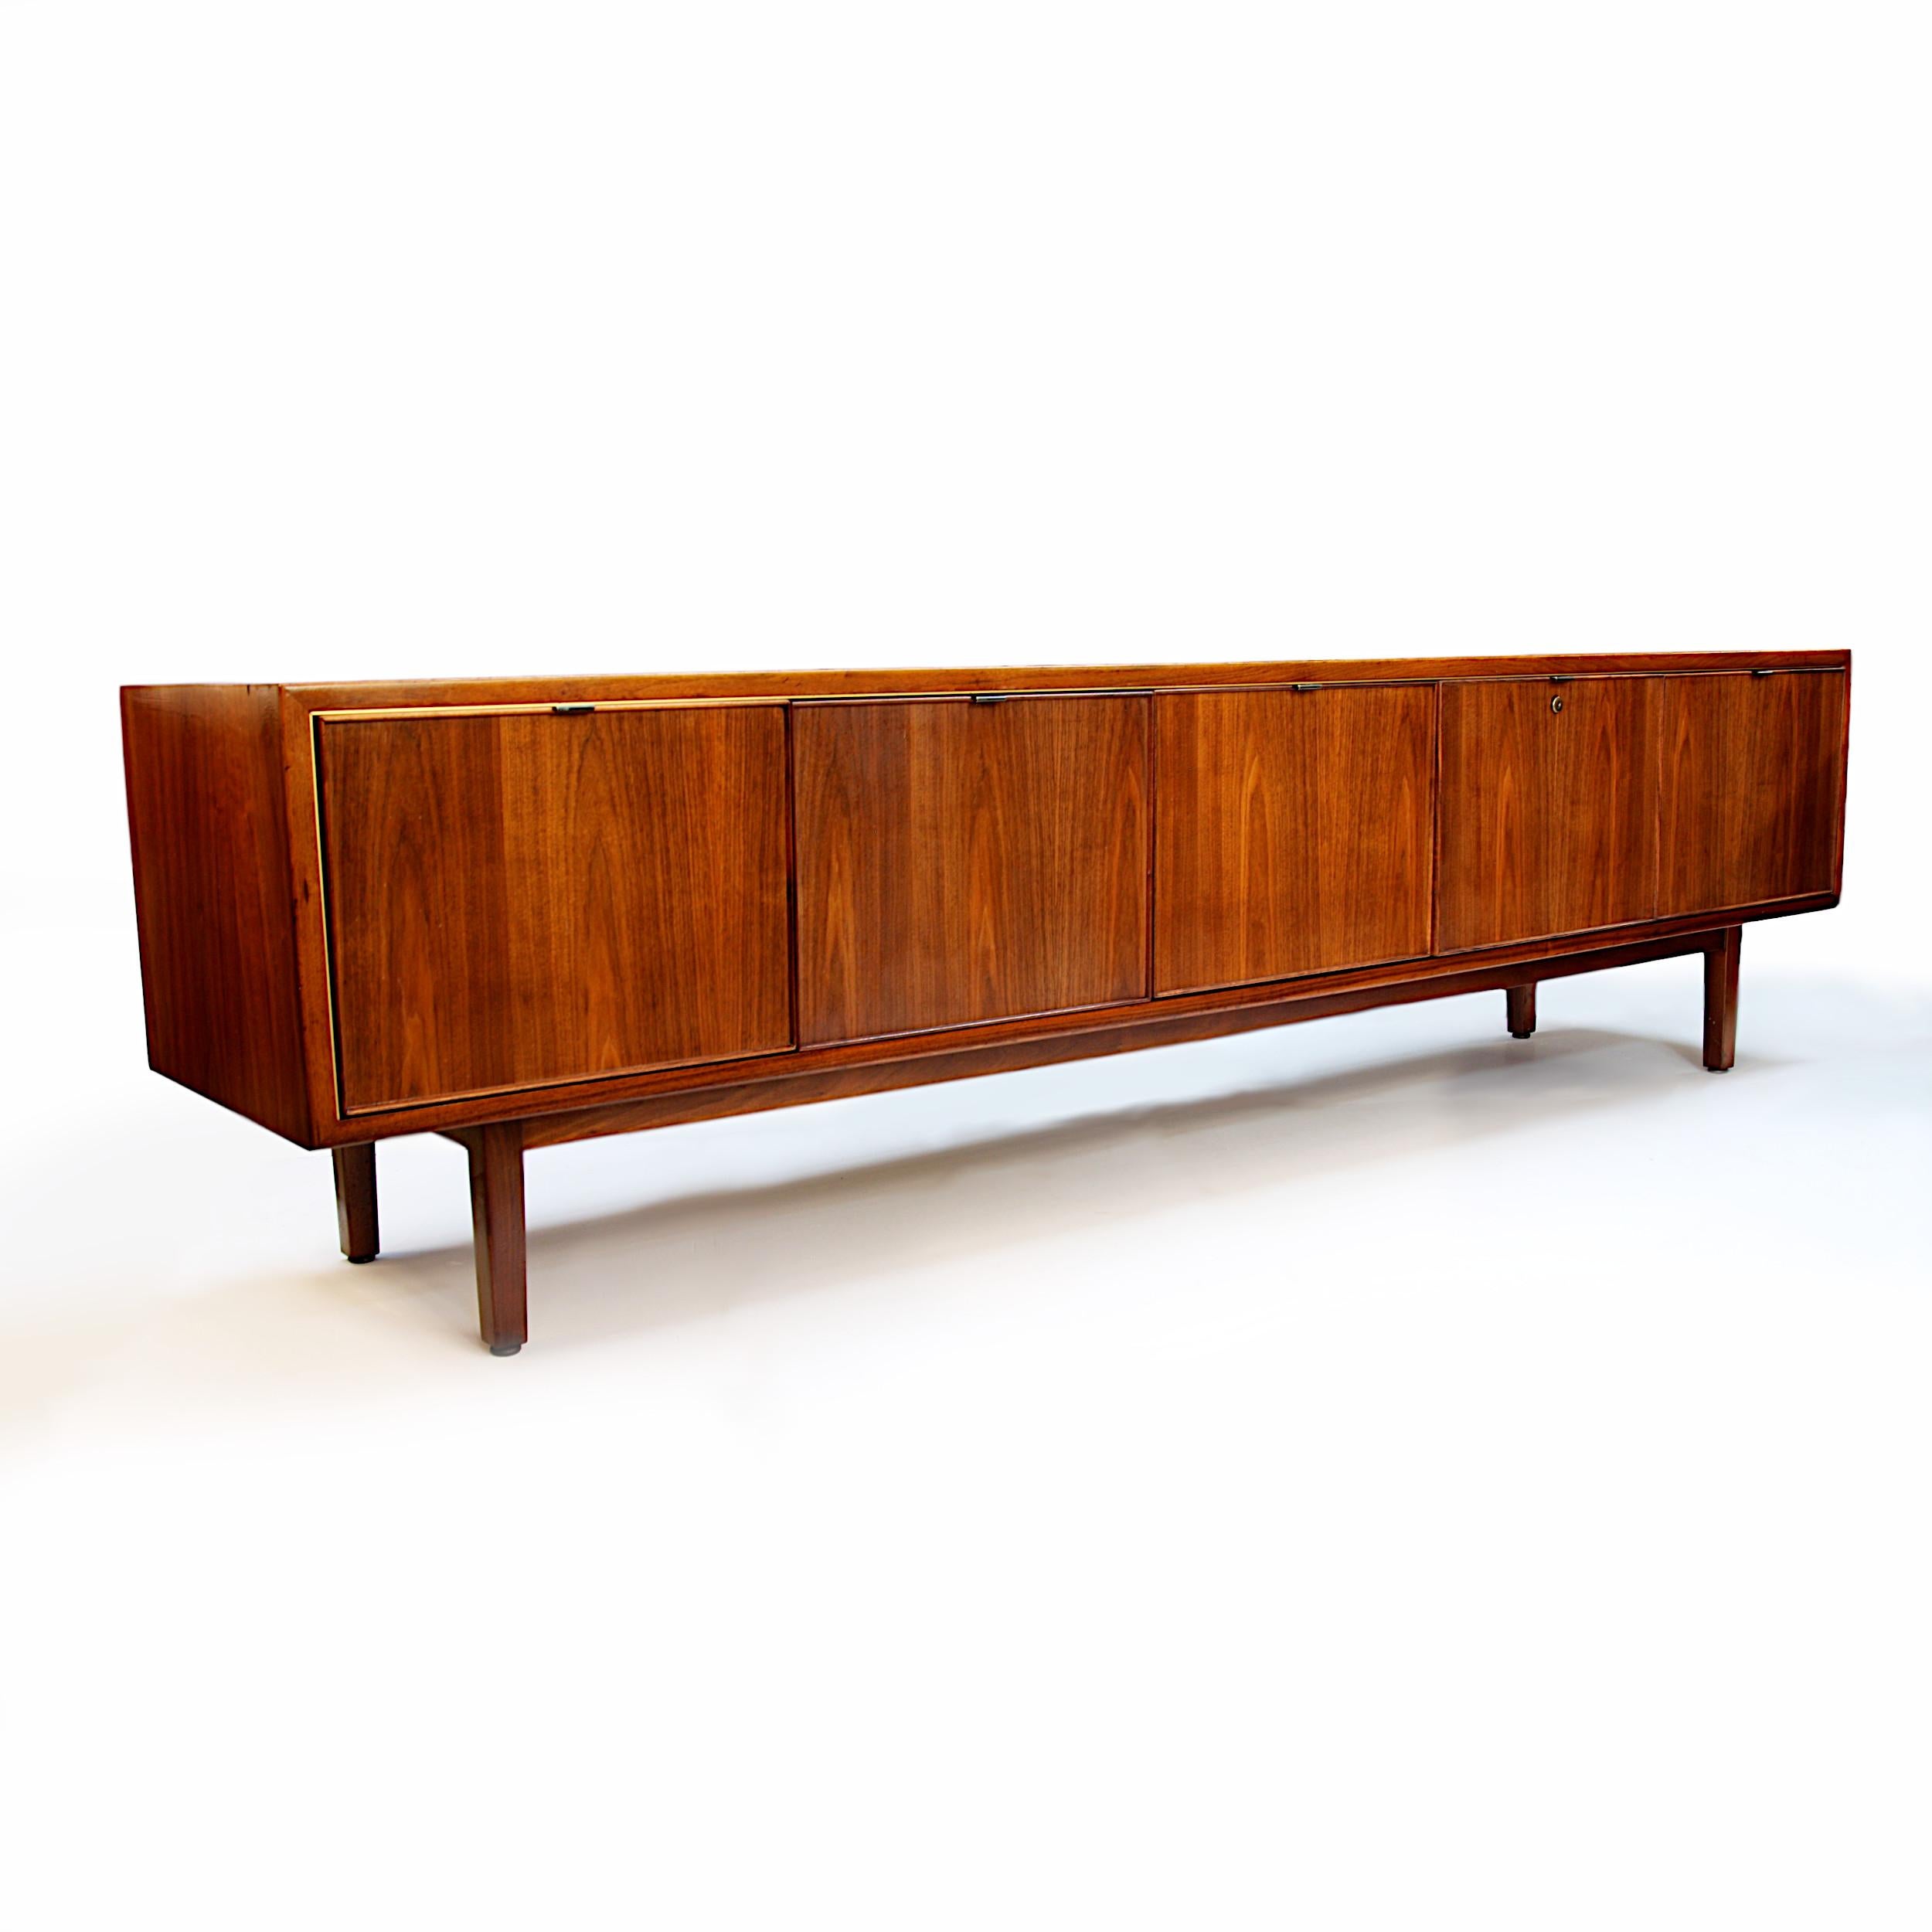 This wonderful Mid-Century Modern credenza by Stow Davis is full of unique features.  Designed by Alexis Yermakov as part of the 